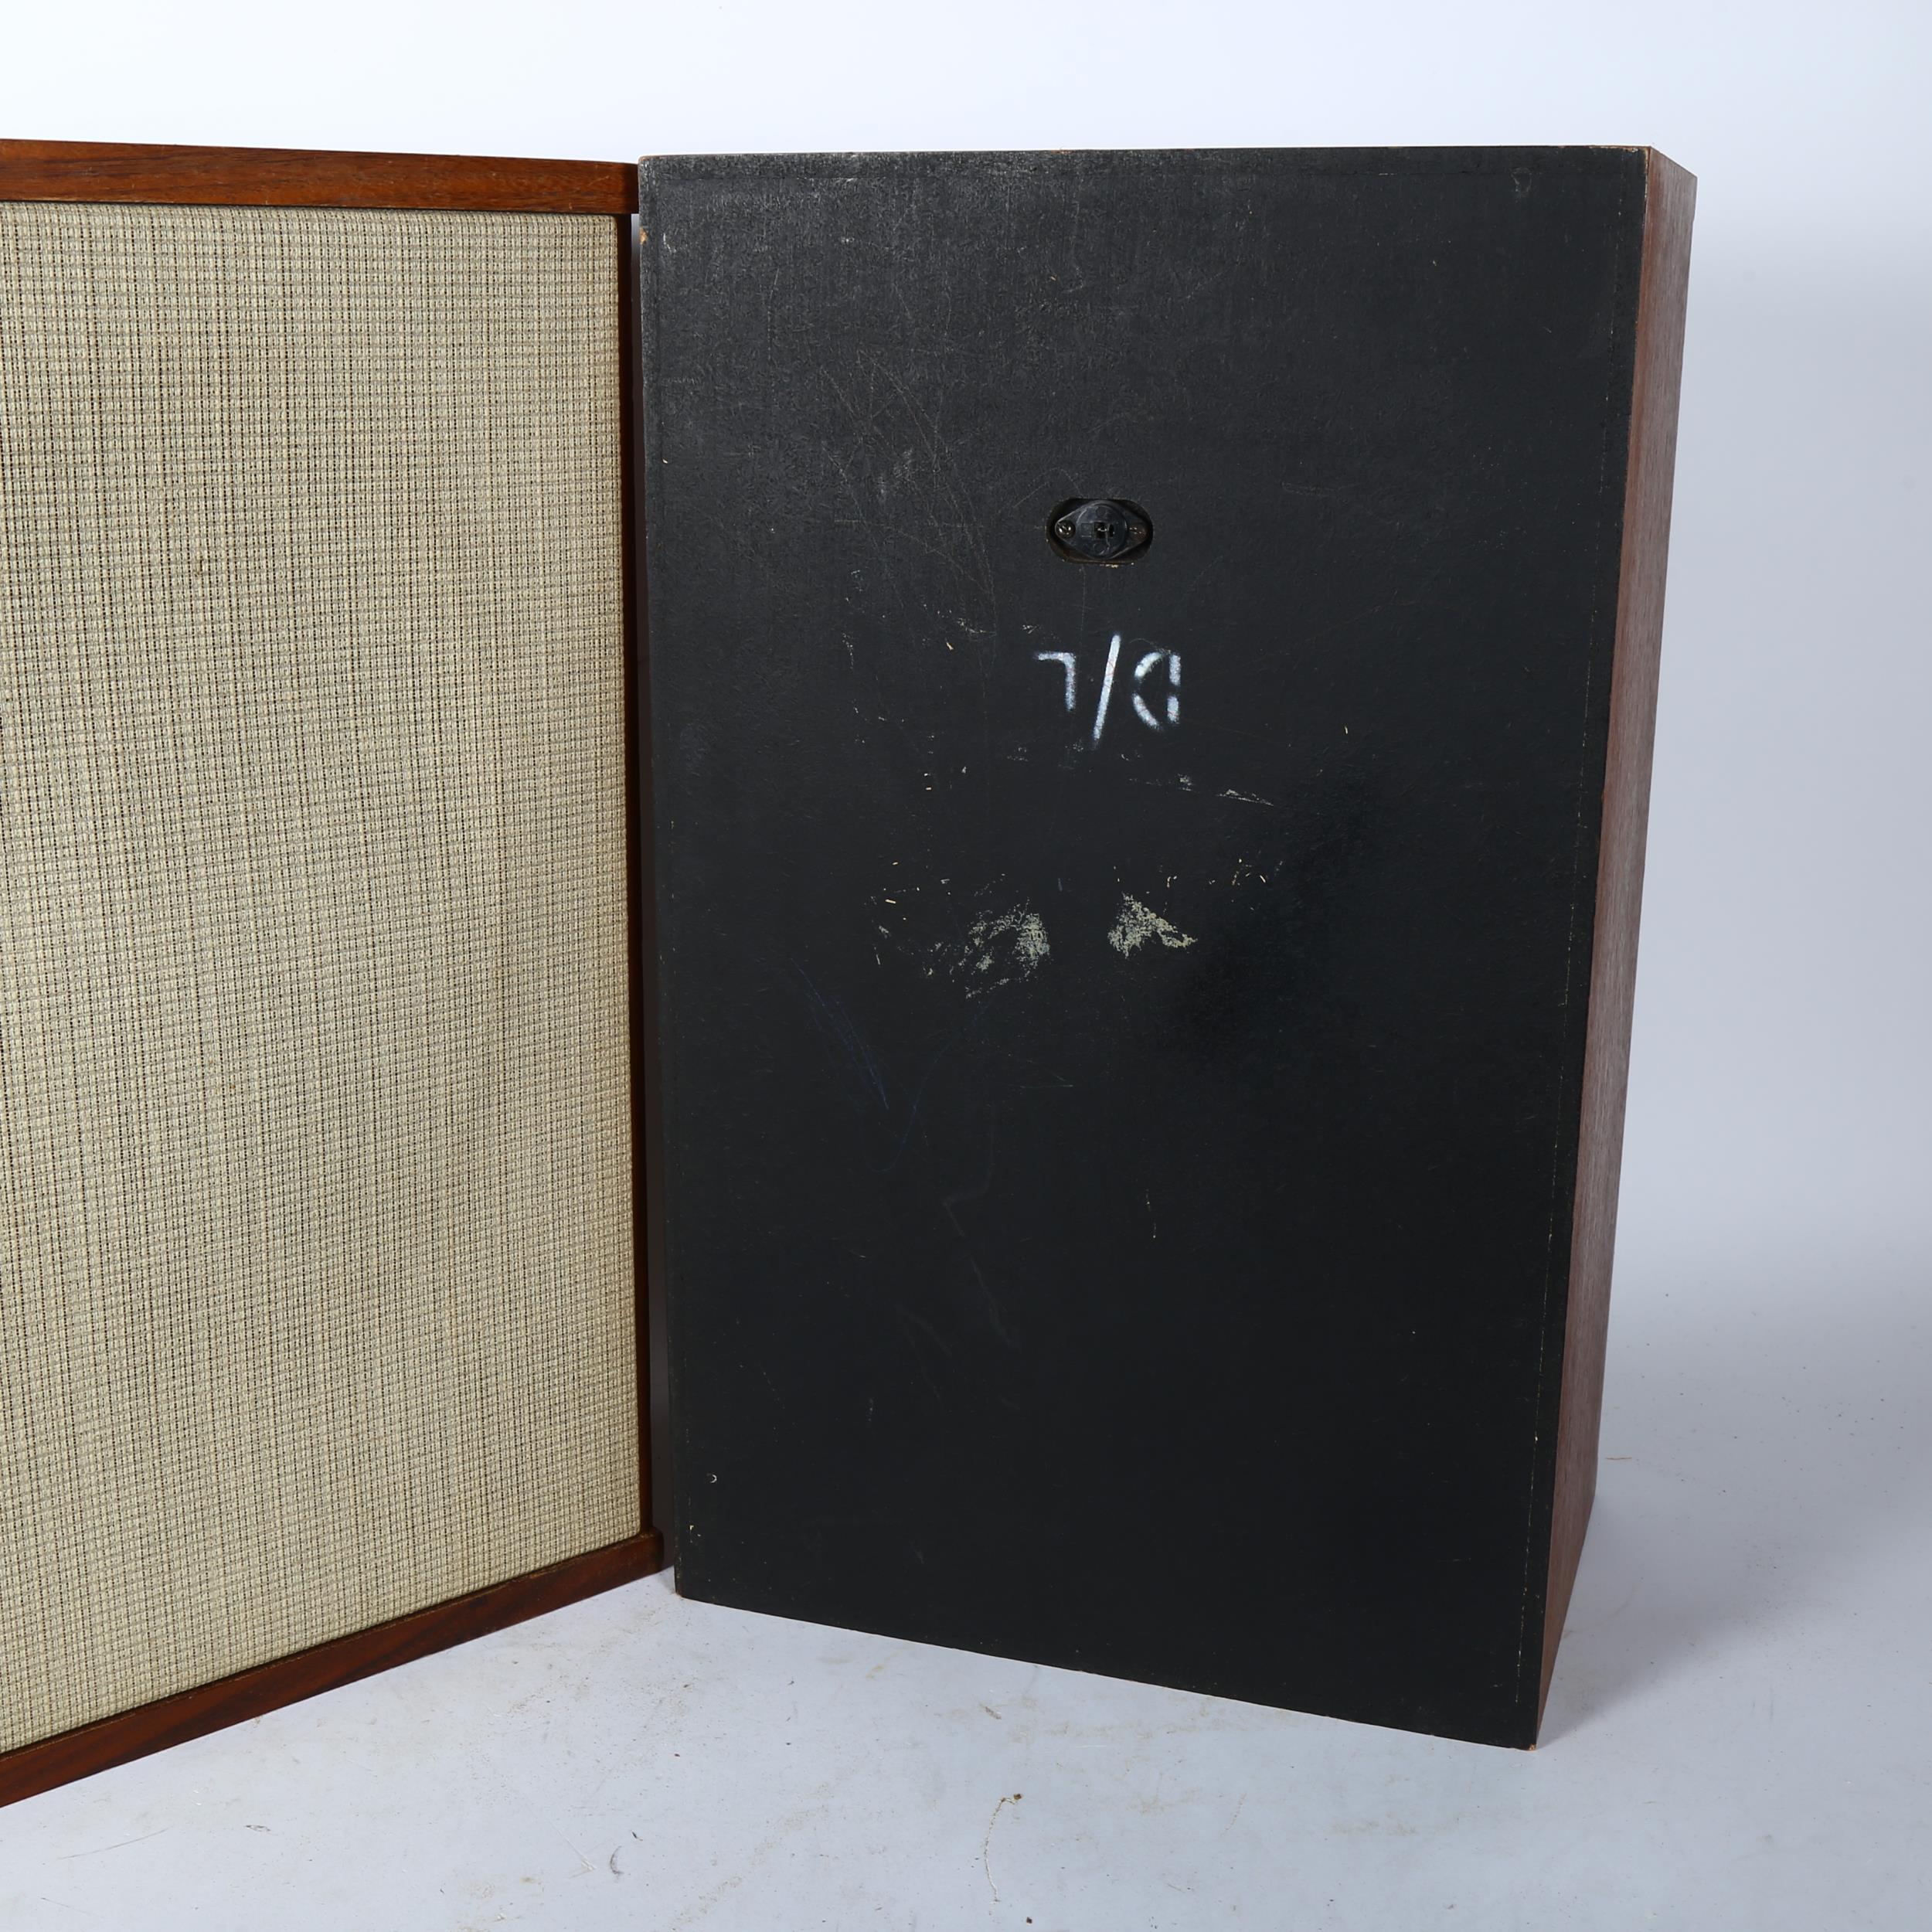 A pair of Vintage 1970s wooden floor standing speakers, unmarked in terms of maker's label, no - Image 2 of 2